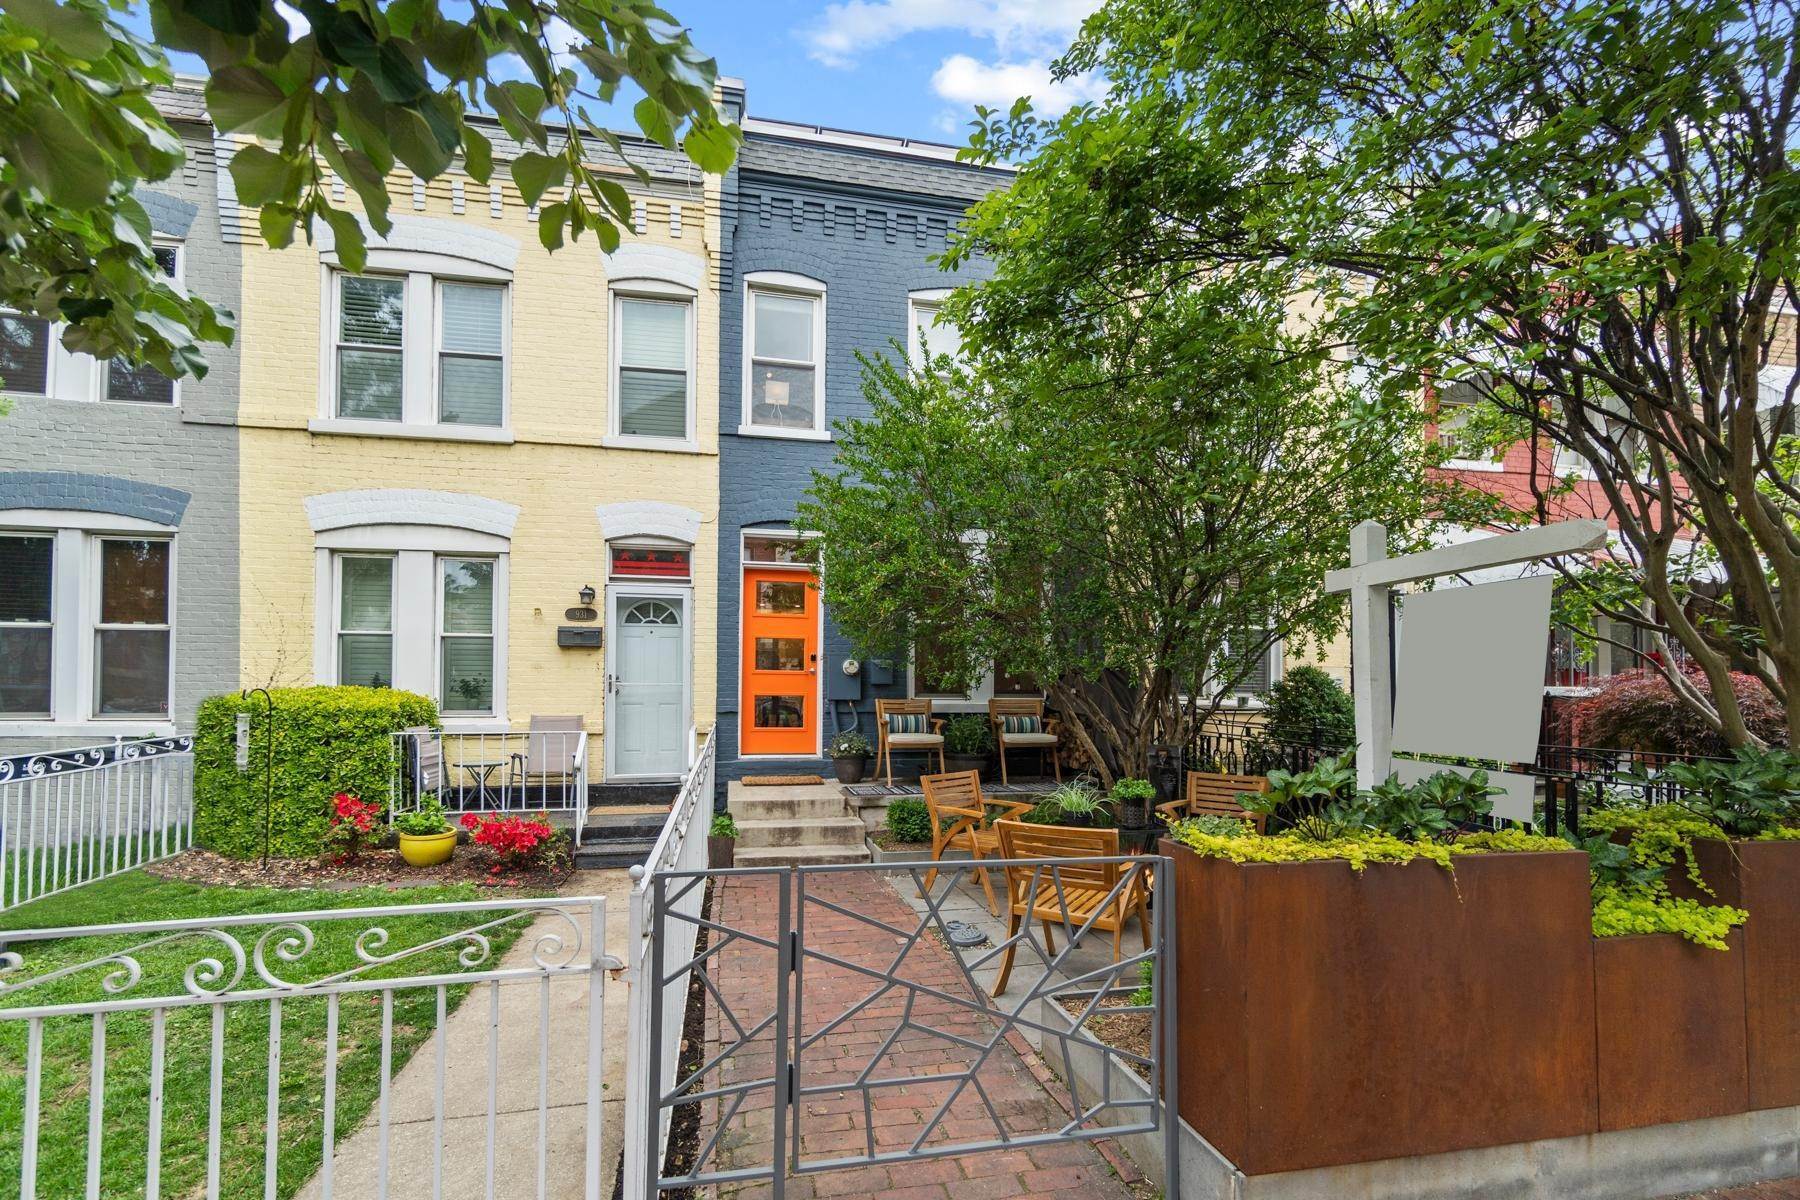 Other Residential Homes for Sale at 929 5th St Se Washington, District Of Columbia 20003 United States